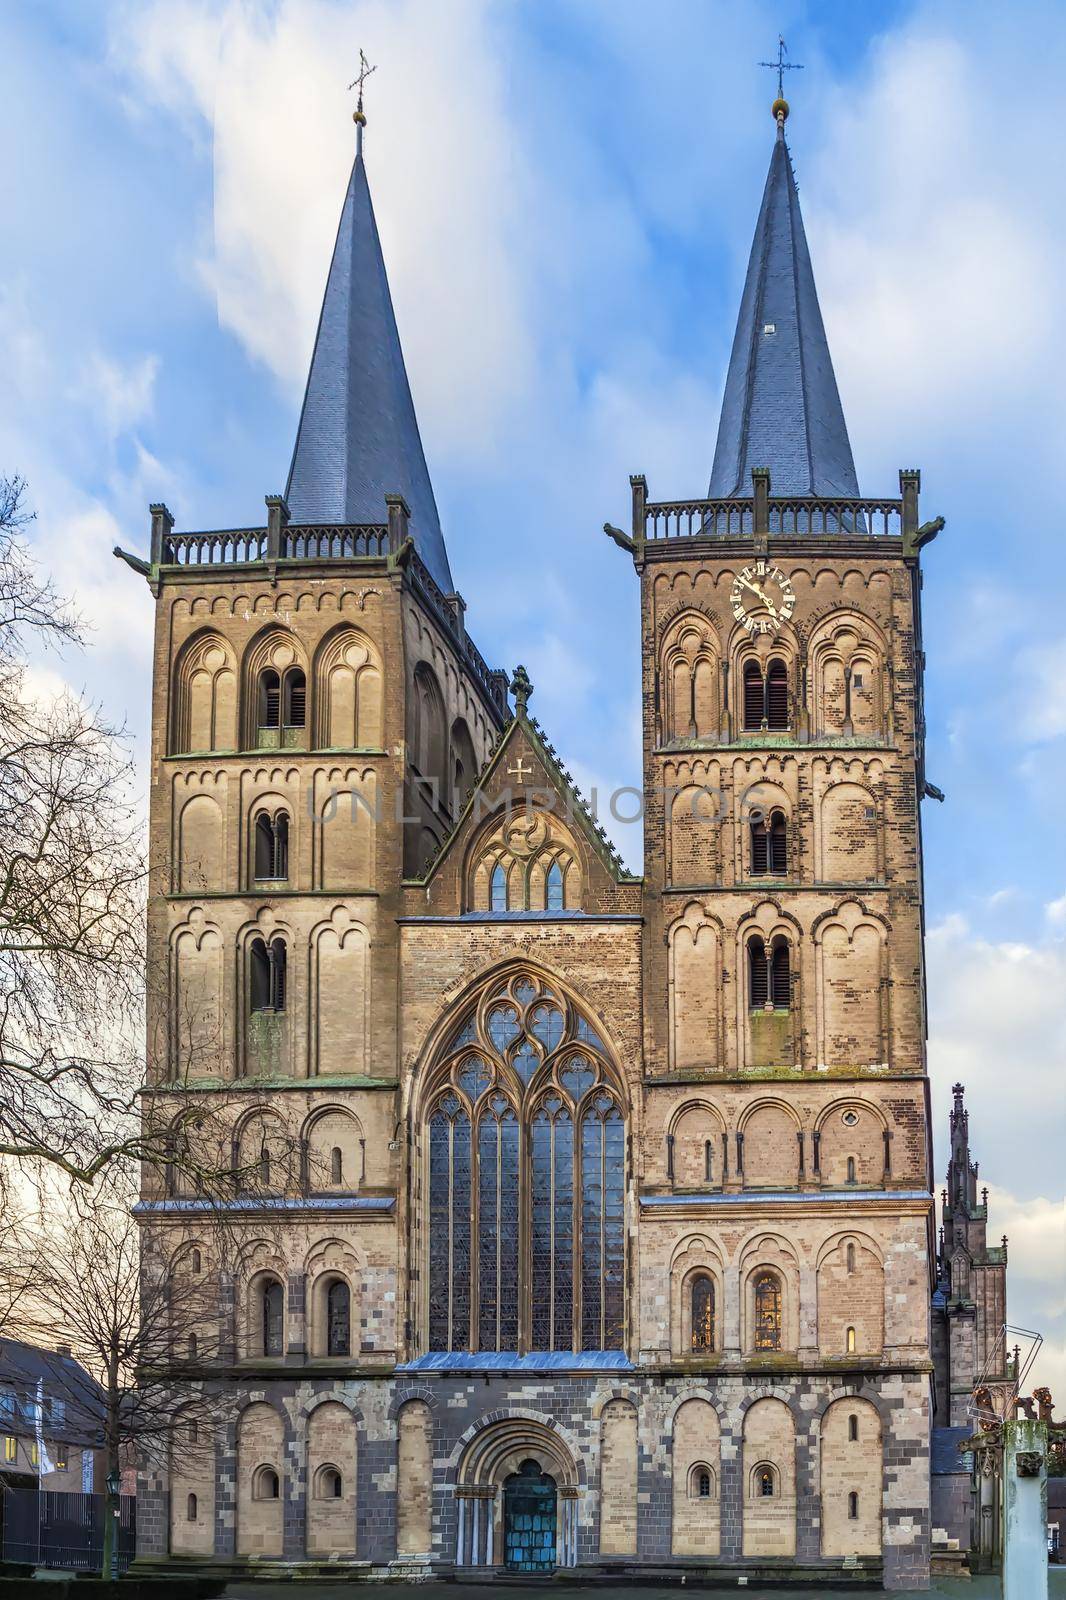 Xanten Cathedral, sometimes called St. Victor's Cathedral is a Roman Catholic church situated in Xanten, North Rhine-Westphalia, Germany